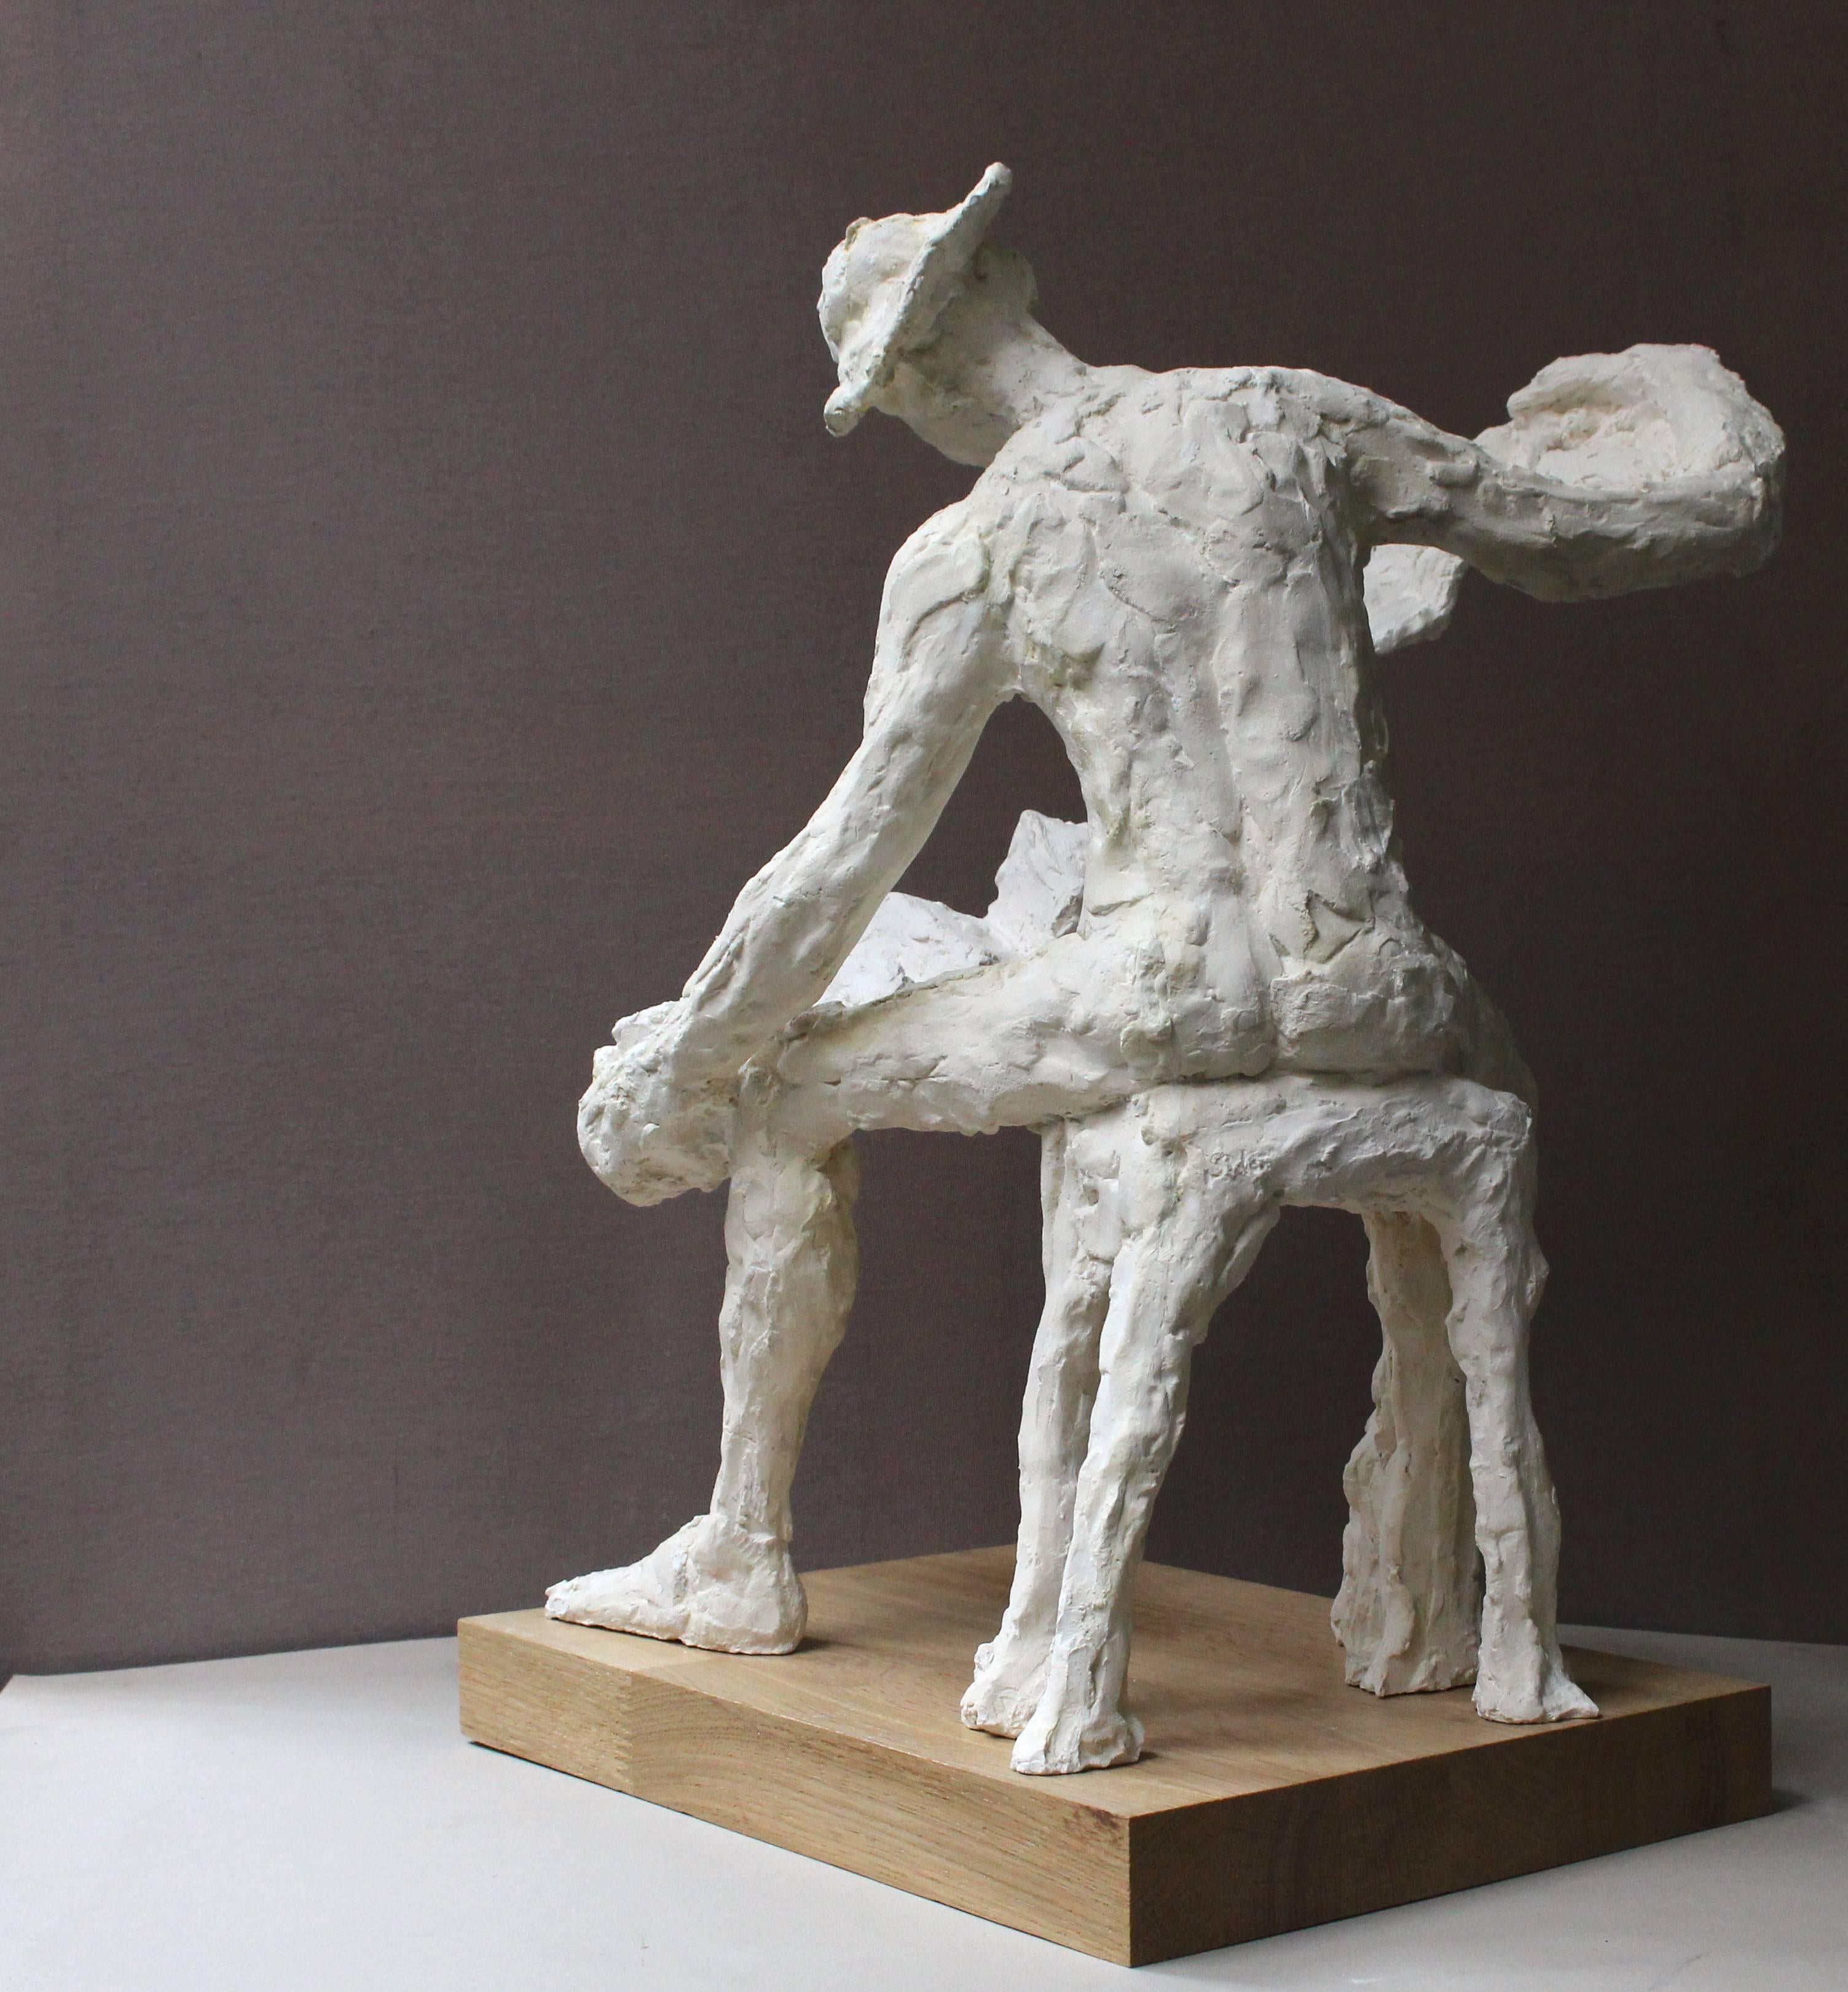 1st prize in France for best sculpture at the Grand Palais Artists Salon, Paris.

by French Artist Sidonie Laurens, sculpture in terracotta.

Sculpture's title: Le Bandonéon (The Bandoneon)

It comes with its wood plinth that brings a